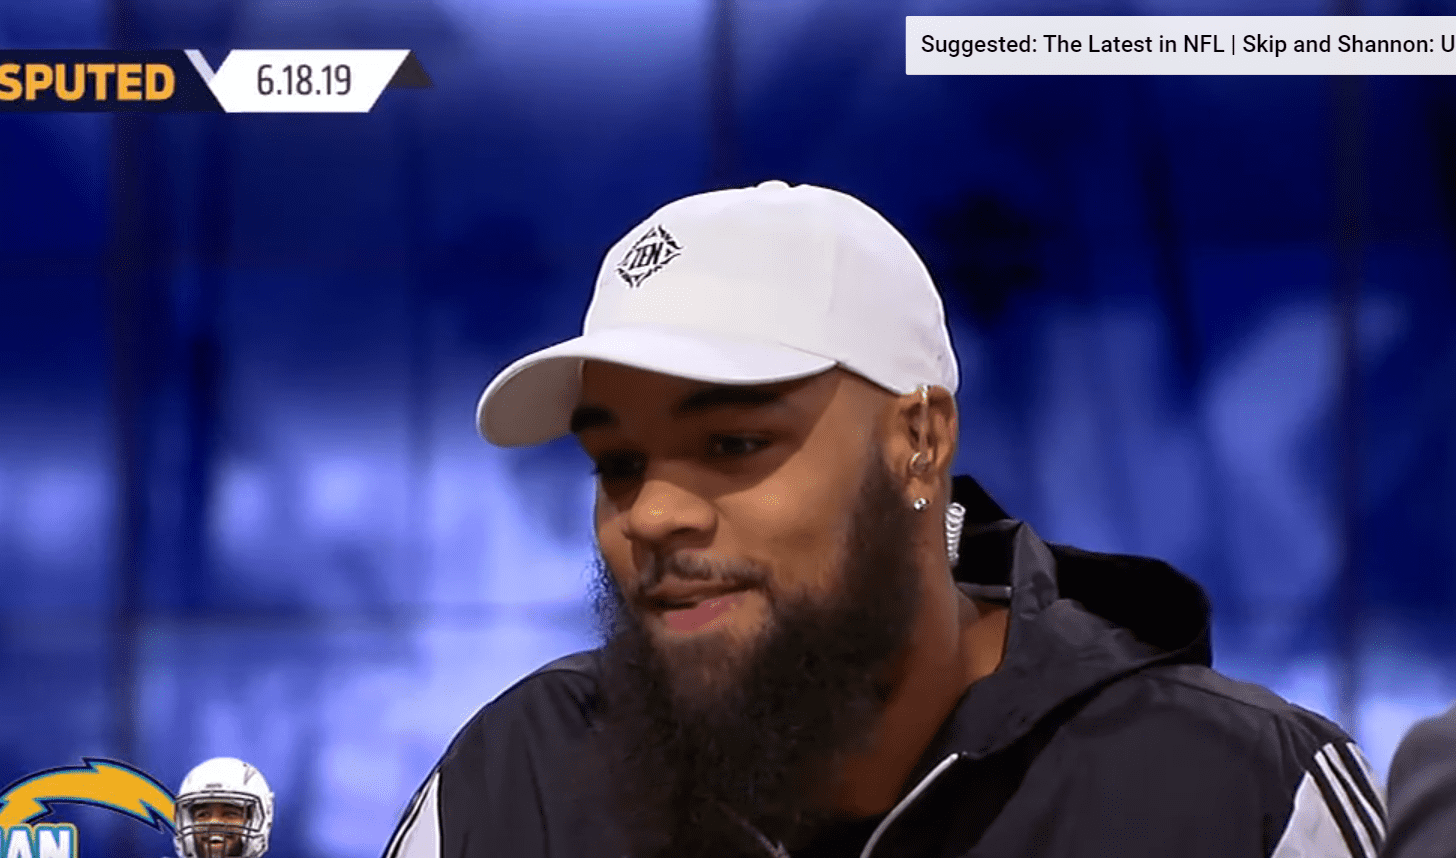 Keenan Allen discusses the Chargers' outlook in an upcoming season on UNDISPUTED. | Photo: YouTube/Skip and Shannon: UNDISPUTED